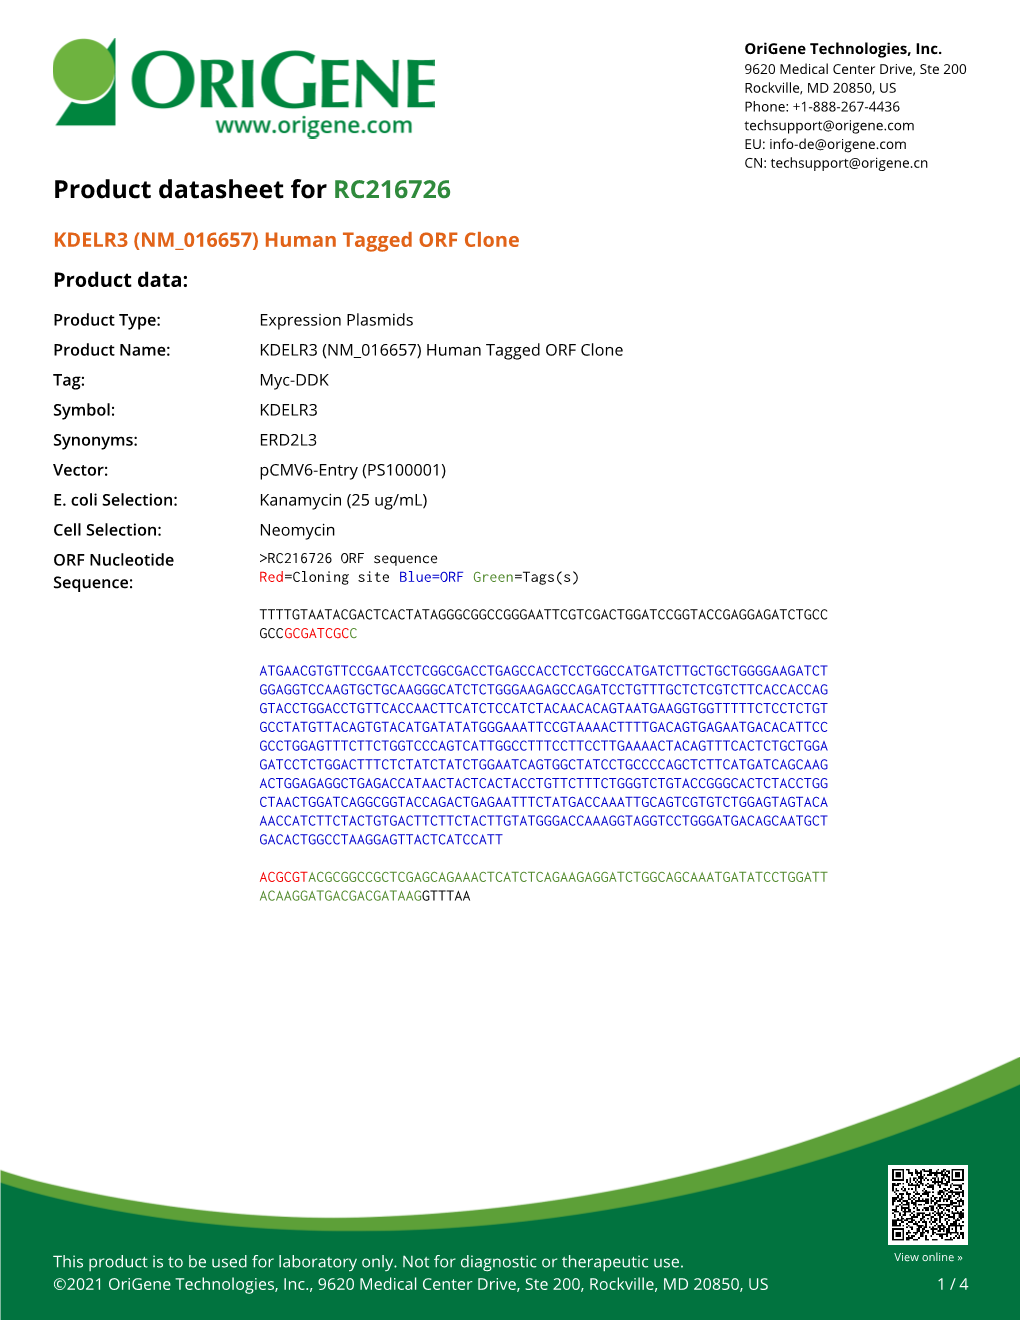 KDELR3 (NM 016657) Human Tagged ORF Clone Product Data